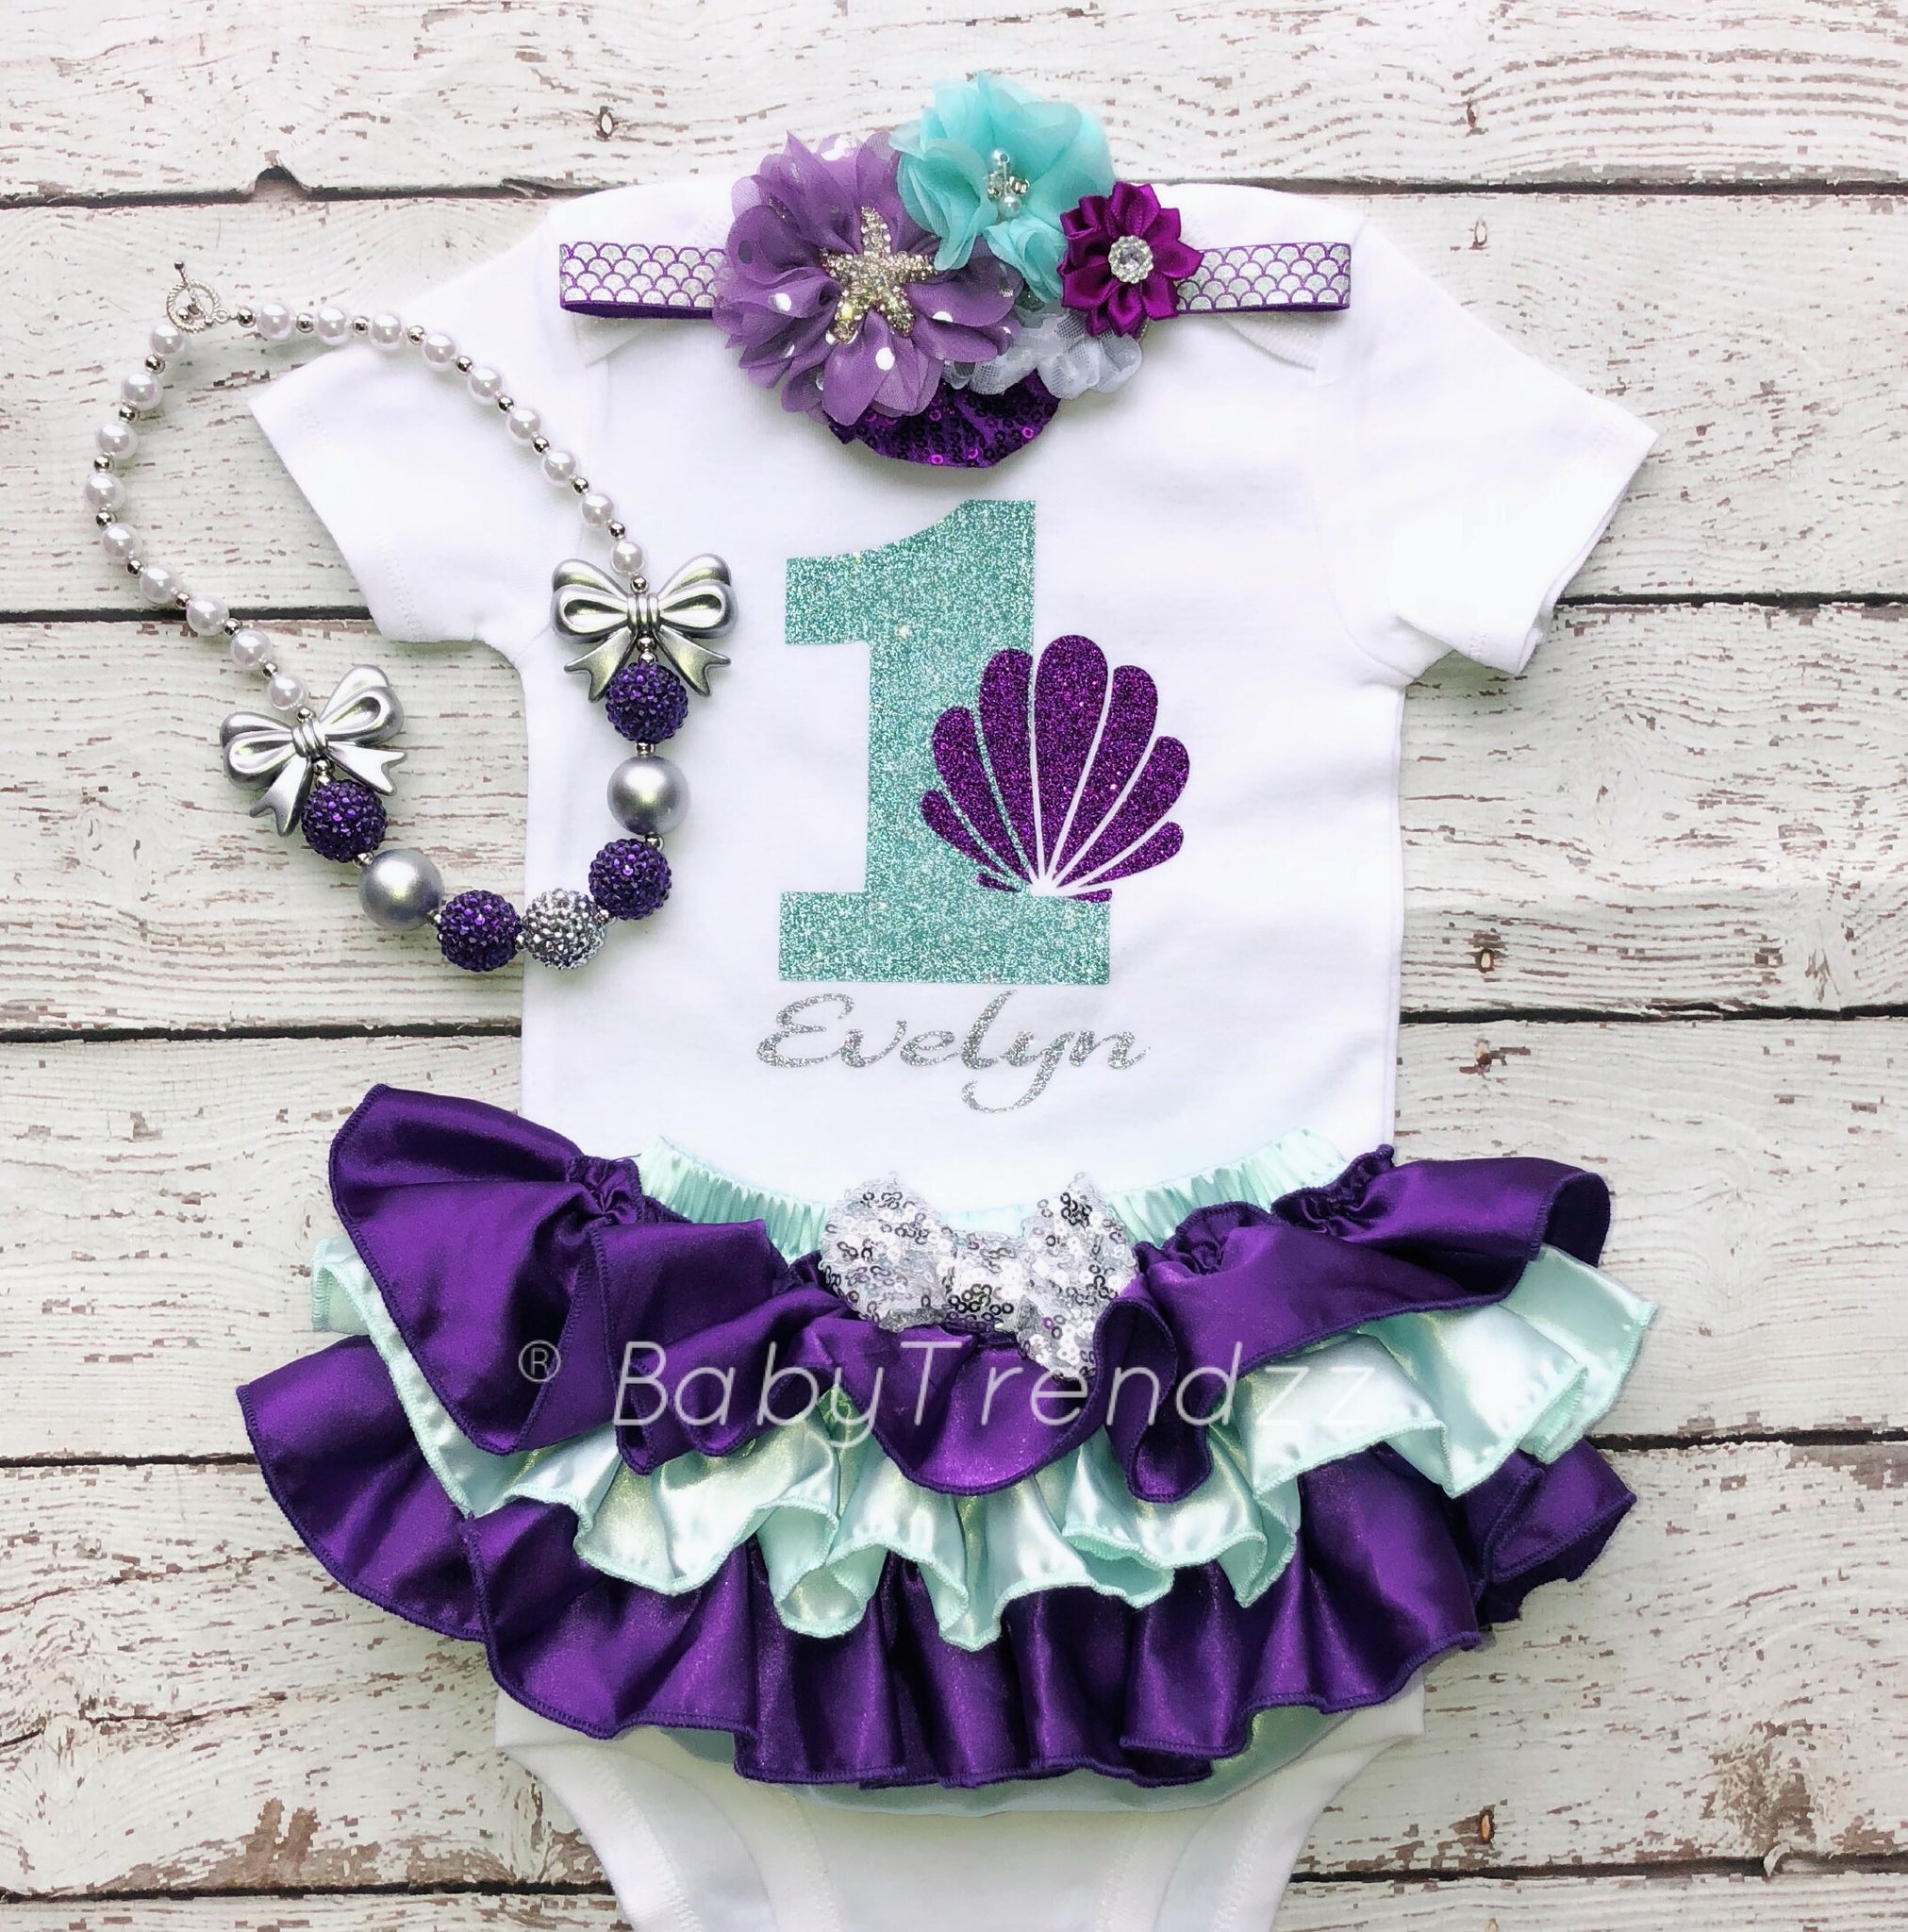 mermaid outfit for 1st birthday